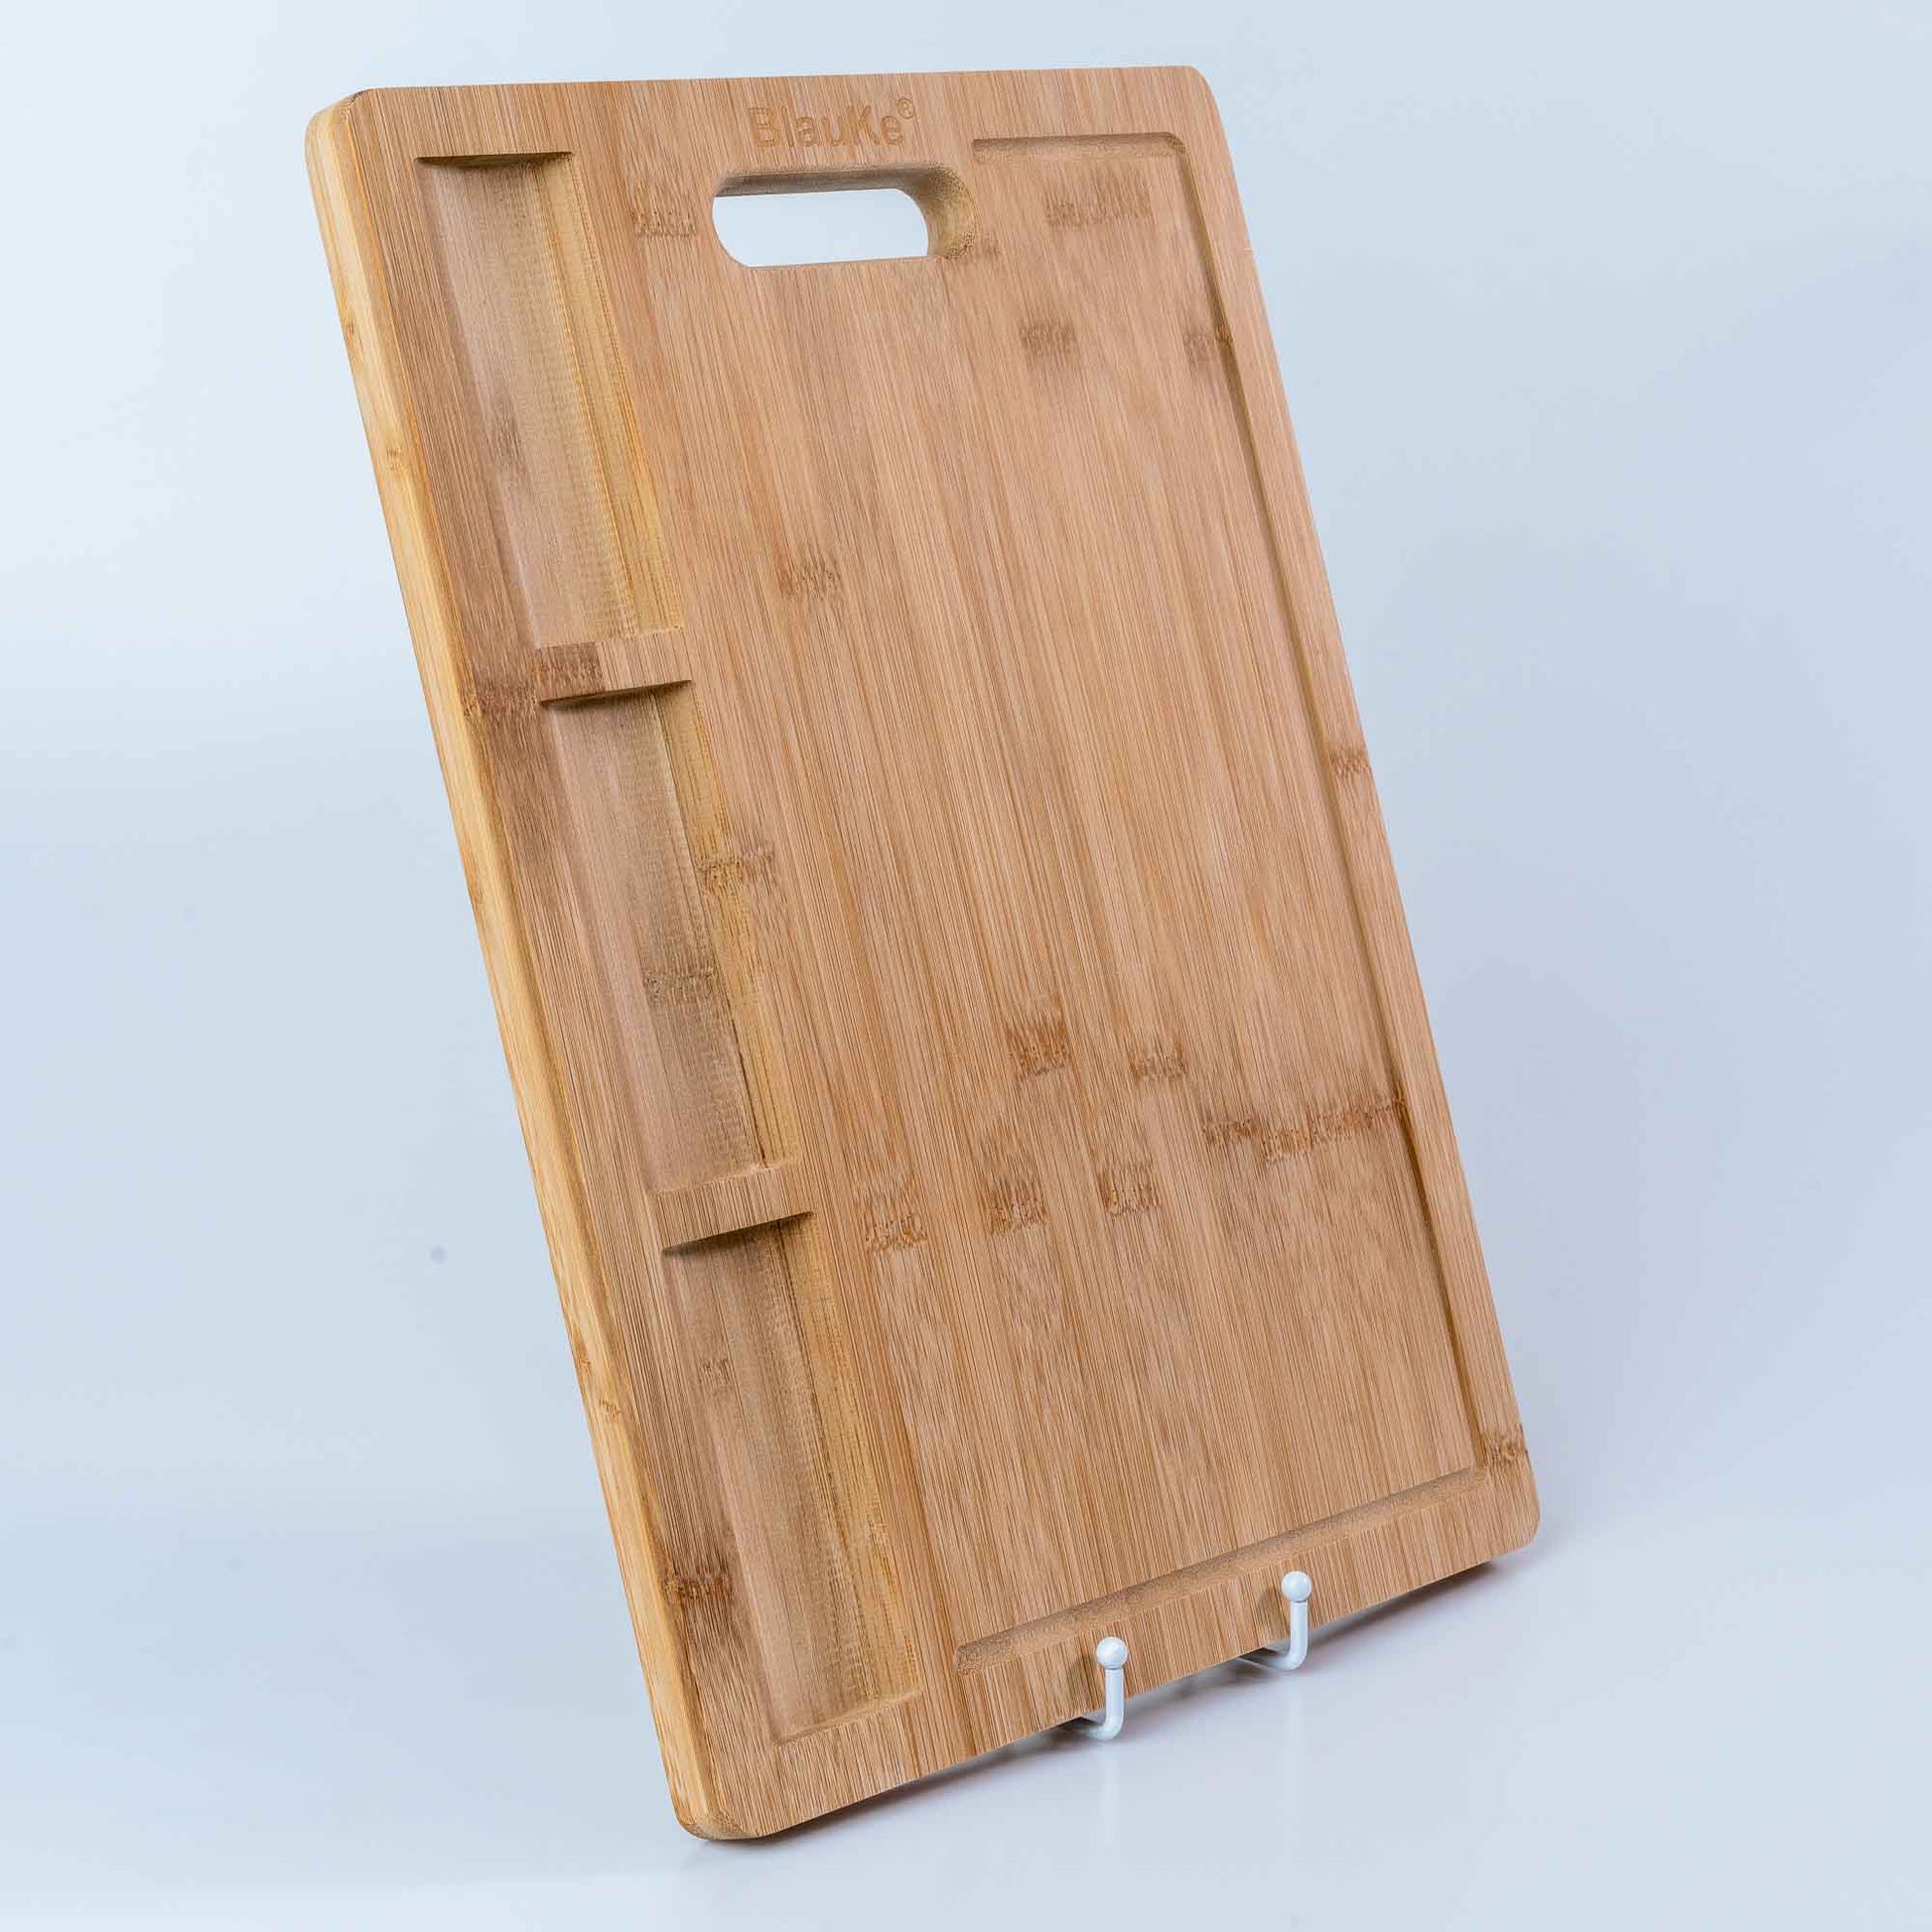 Extra Large Bamboo Cutting Board - 17x12.5 inch Wood Cutting Board for Meat, Cheese, Veggies - Wood Serving Tray with Juice Groove and 3 Compartments-10